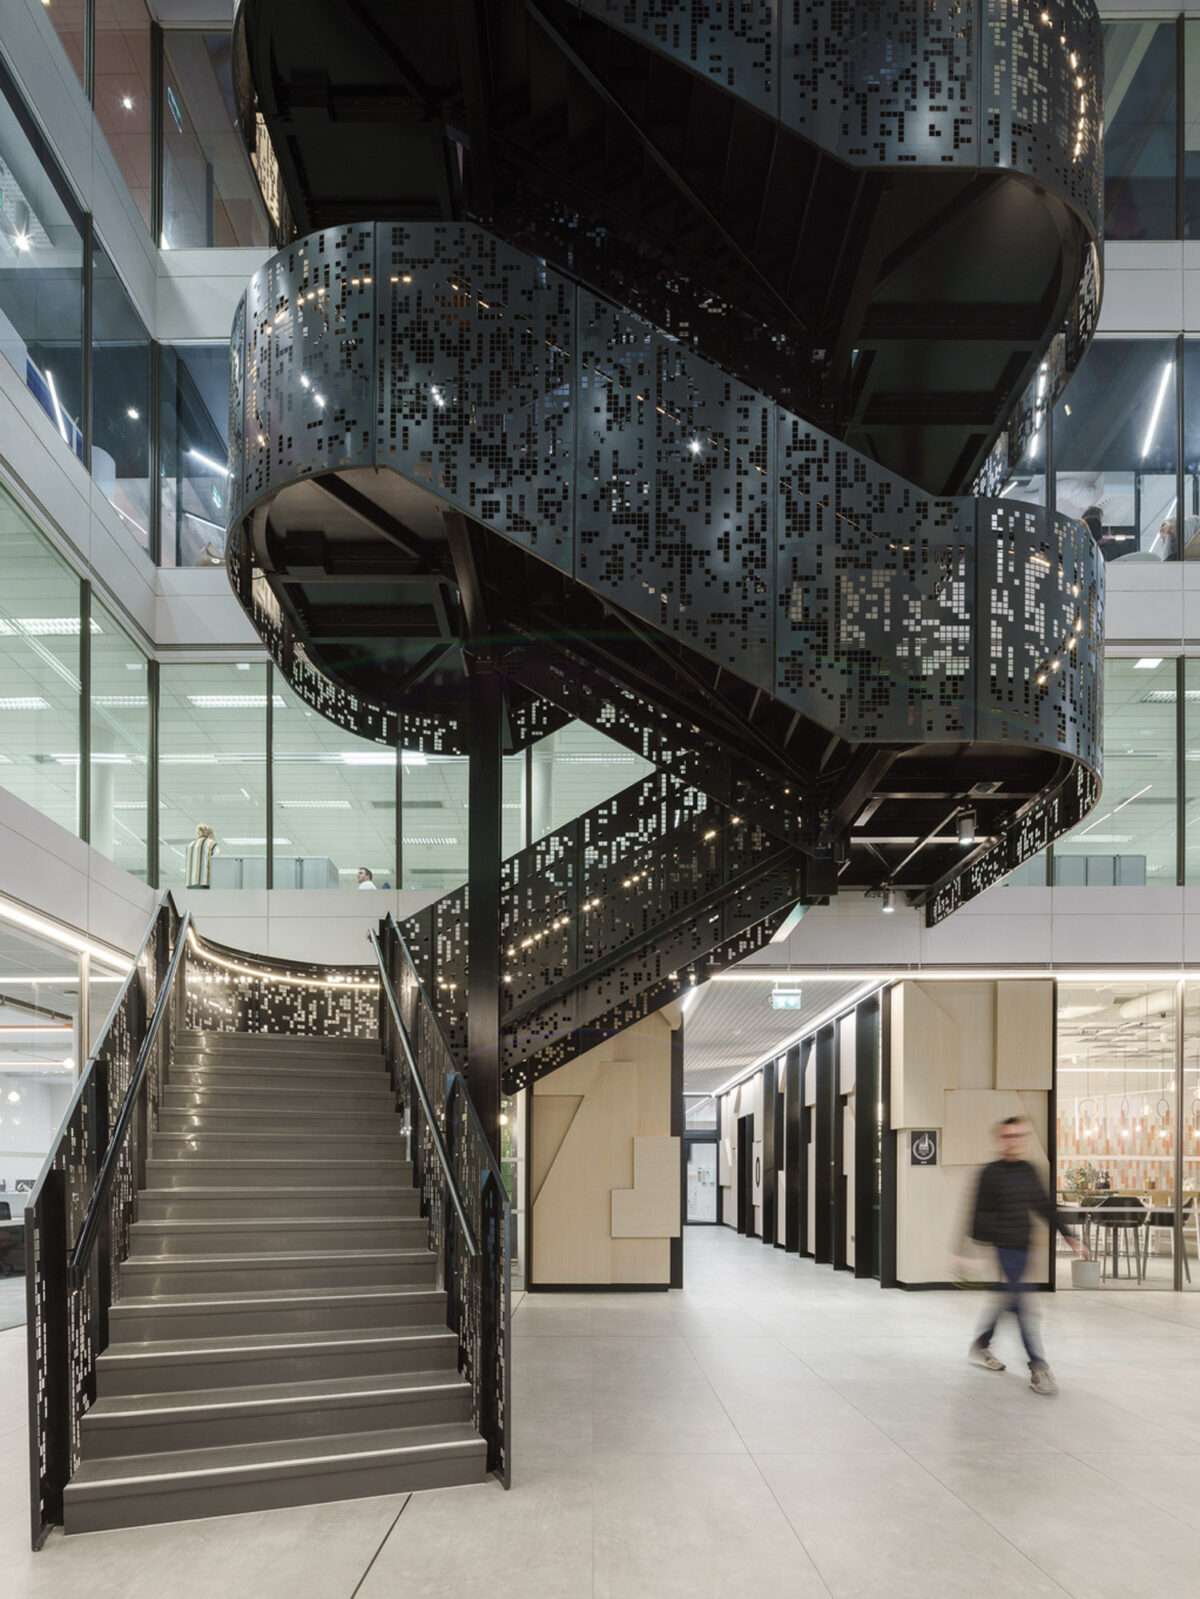 A modern atrium featuring a striking black spiral staircase with intricate geometric cutouts, creating a play of light and shadow. The surrounding minimalistic design accentuates the staircase's sculptural form.